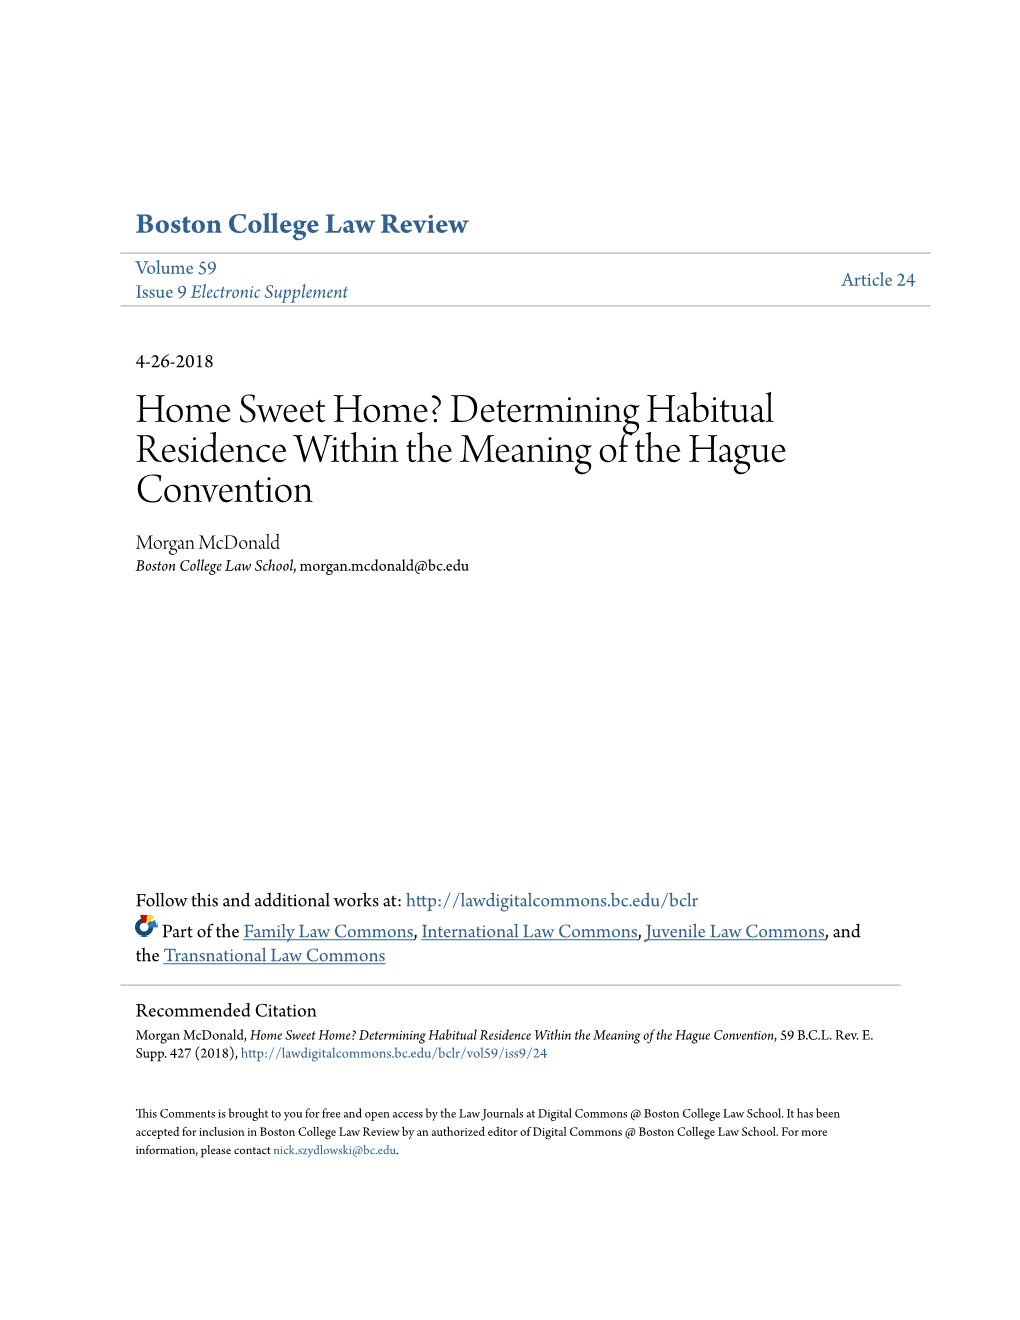 Determining Habitual Residence Within the Meaning of the Hague Convention Morgan Mcdonald Boston College Law School, Morgan.Mcdonald@Bc.Edu